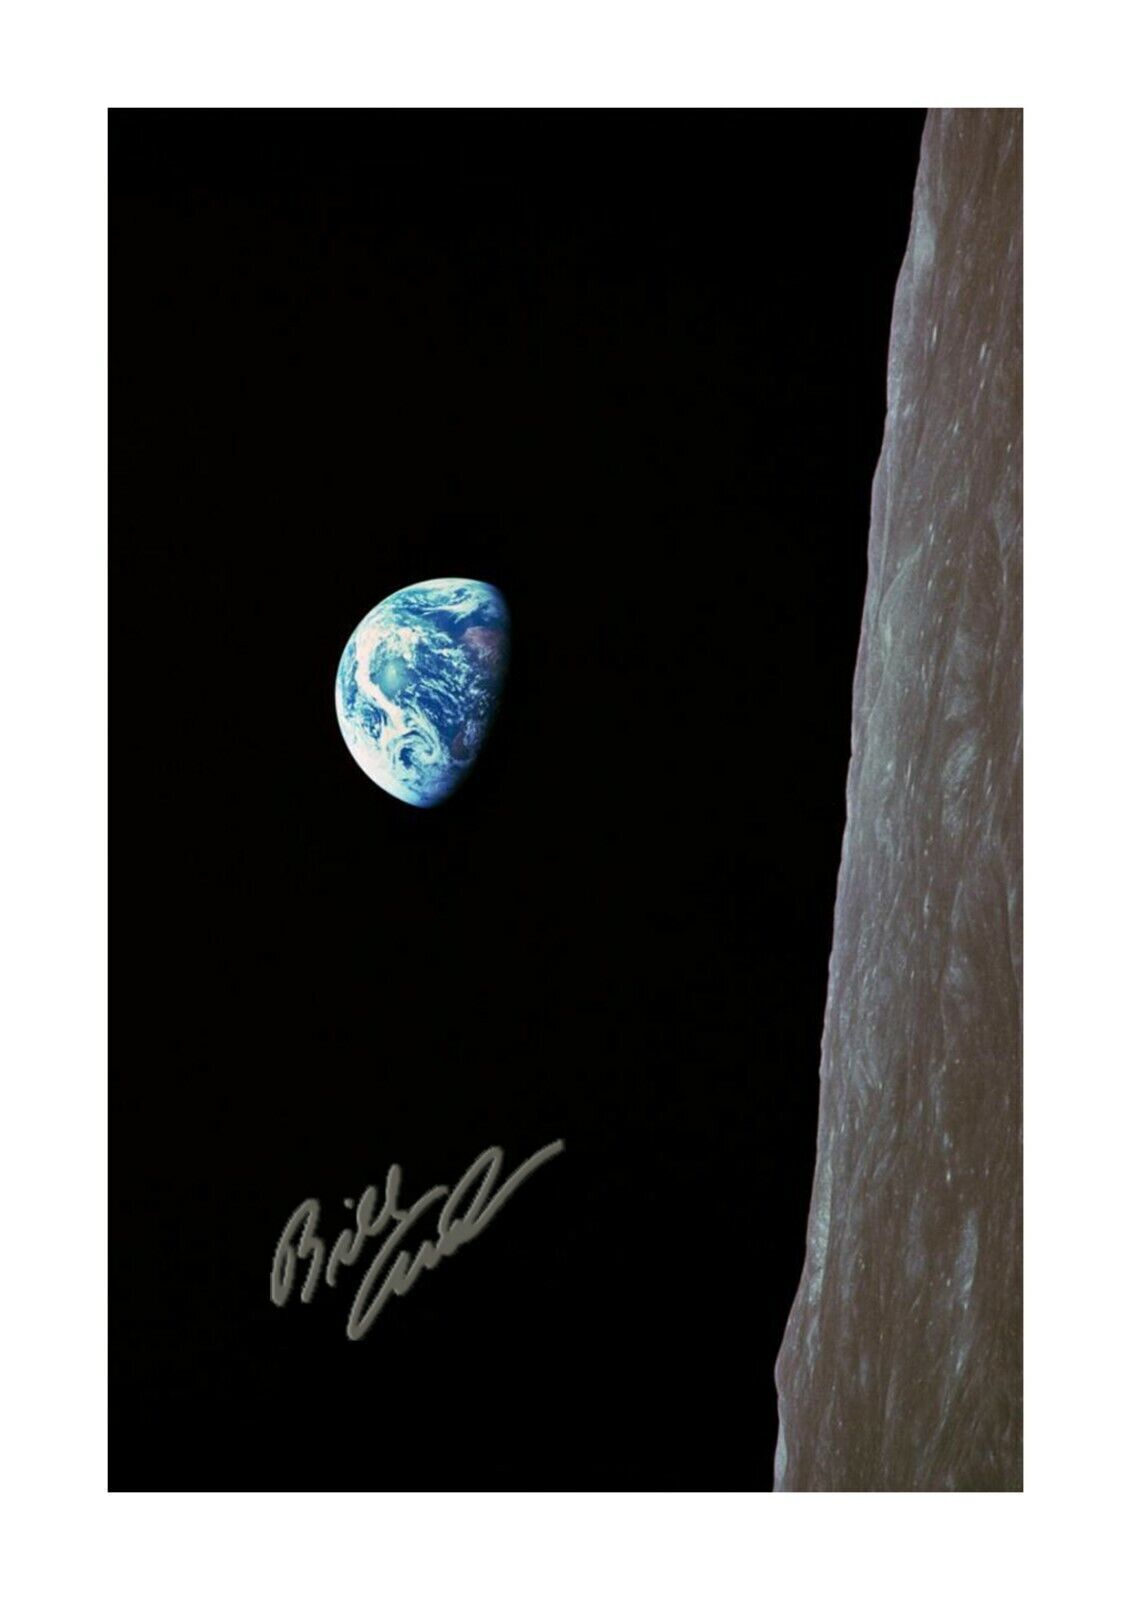 Earthrise Apollo 8 by Bill Anders repro signature A4 Poster with choice of frame